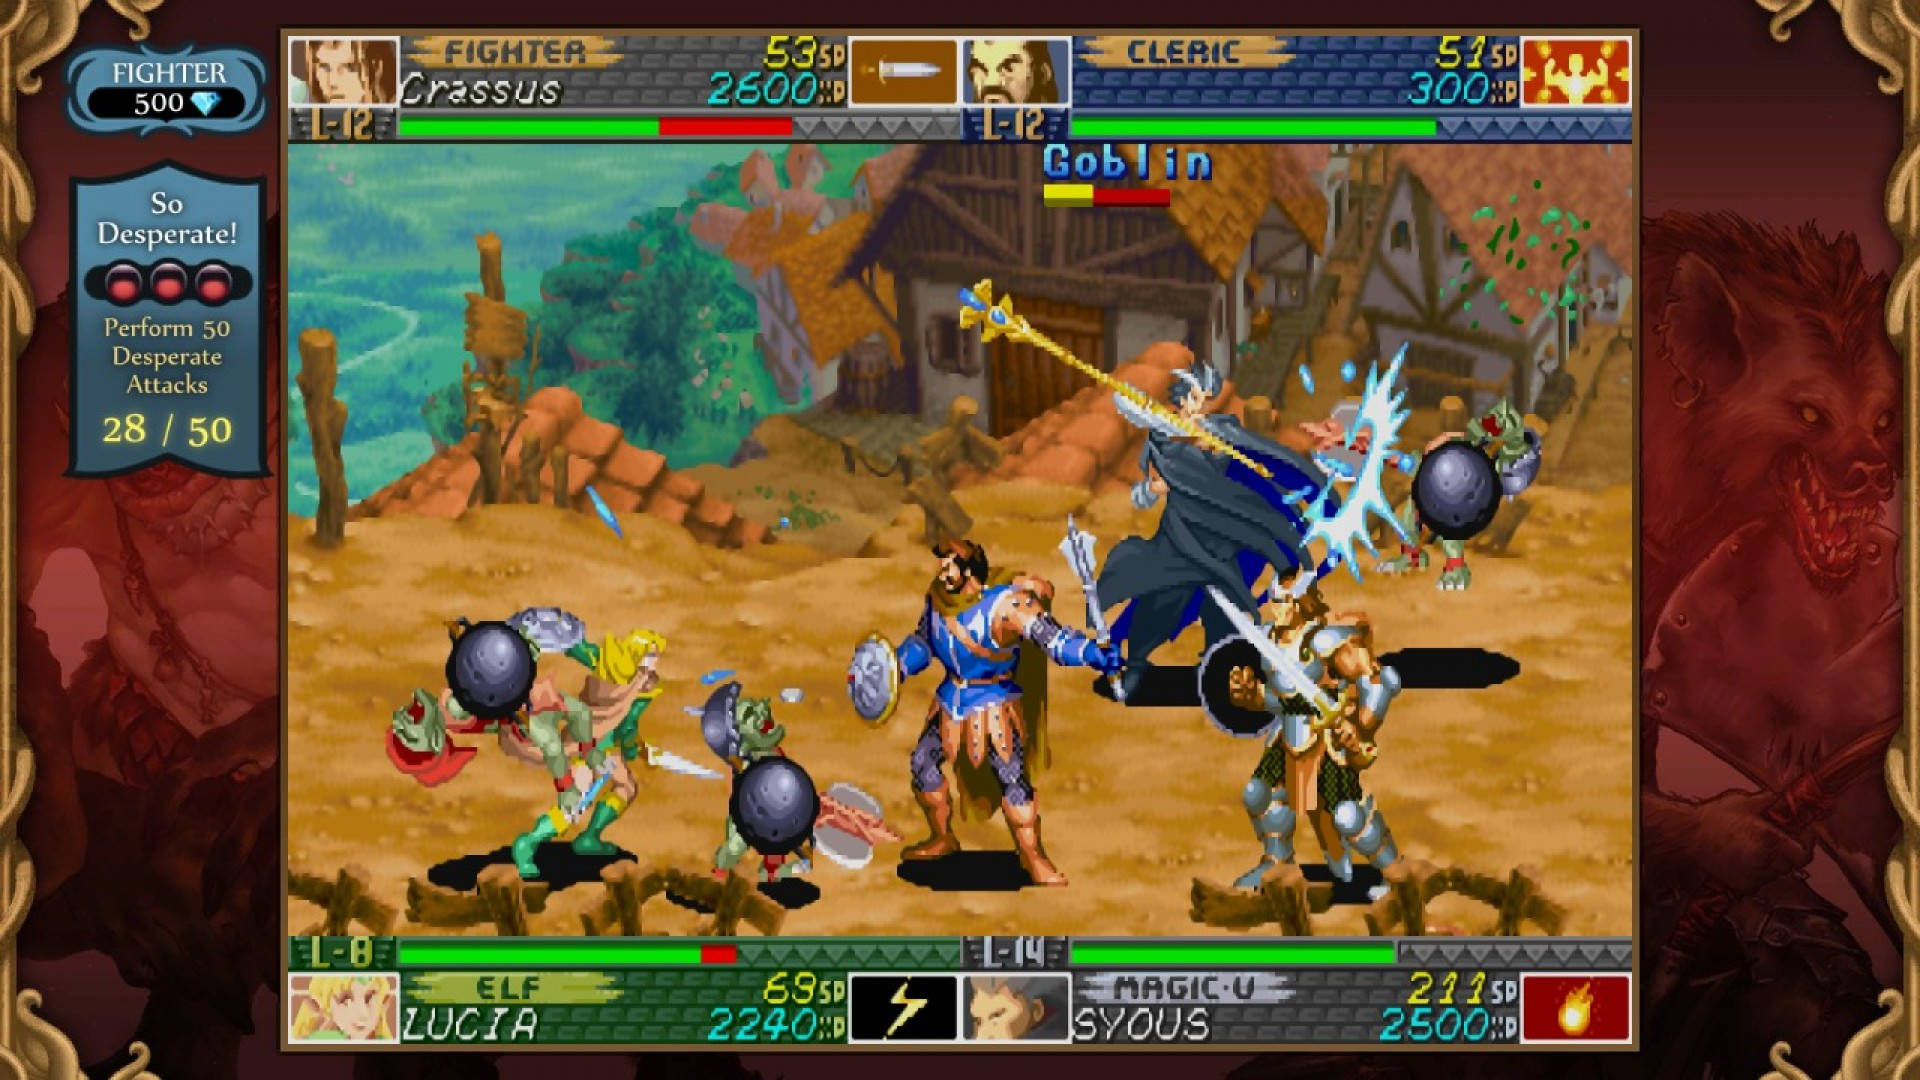 A party are fighting against goblins in a small village in Dungeons & Dragons Chronicles of Mystara, one of the best DnD games.